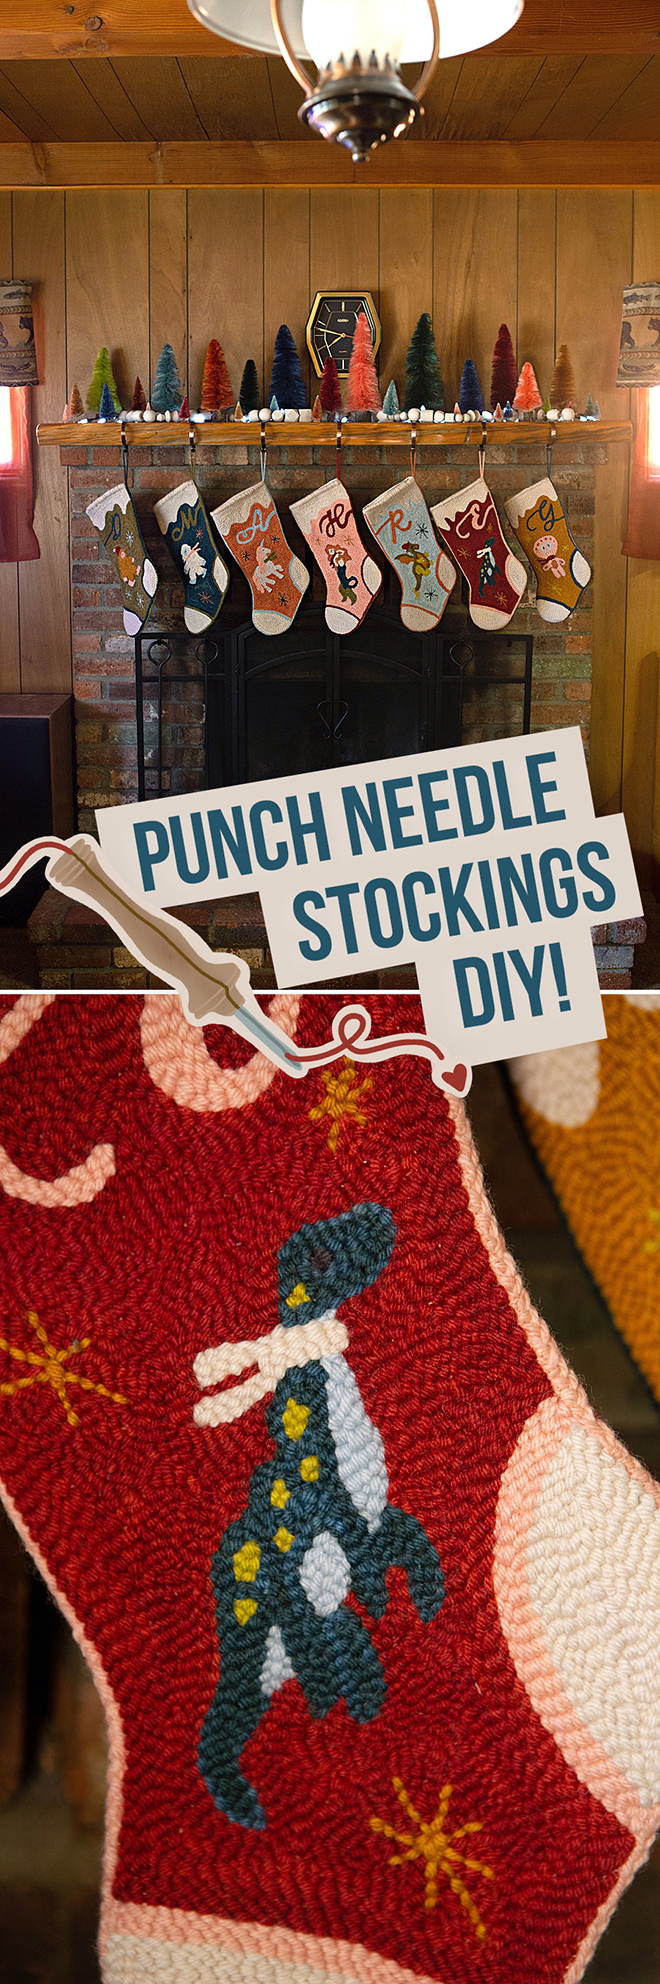 How to make your own heirloom quality, punch needle stockings!